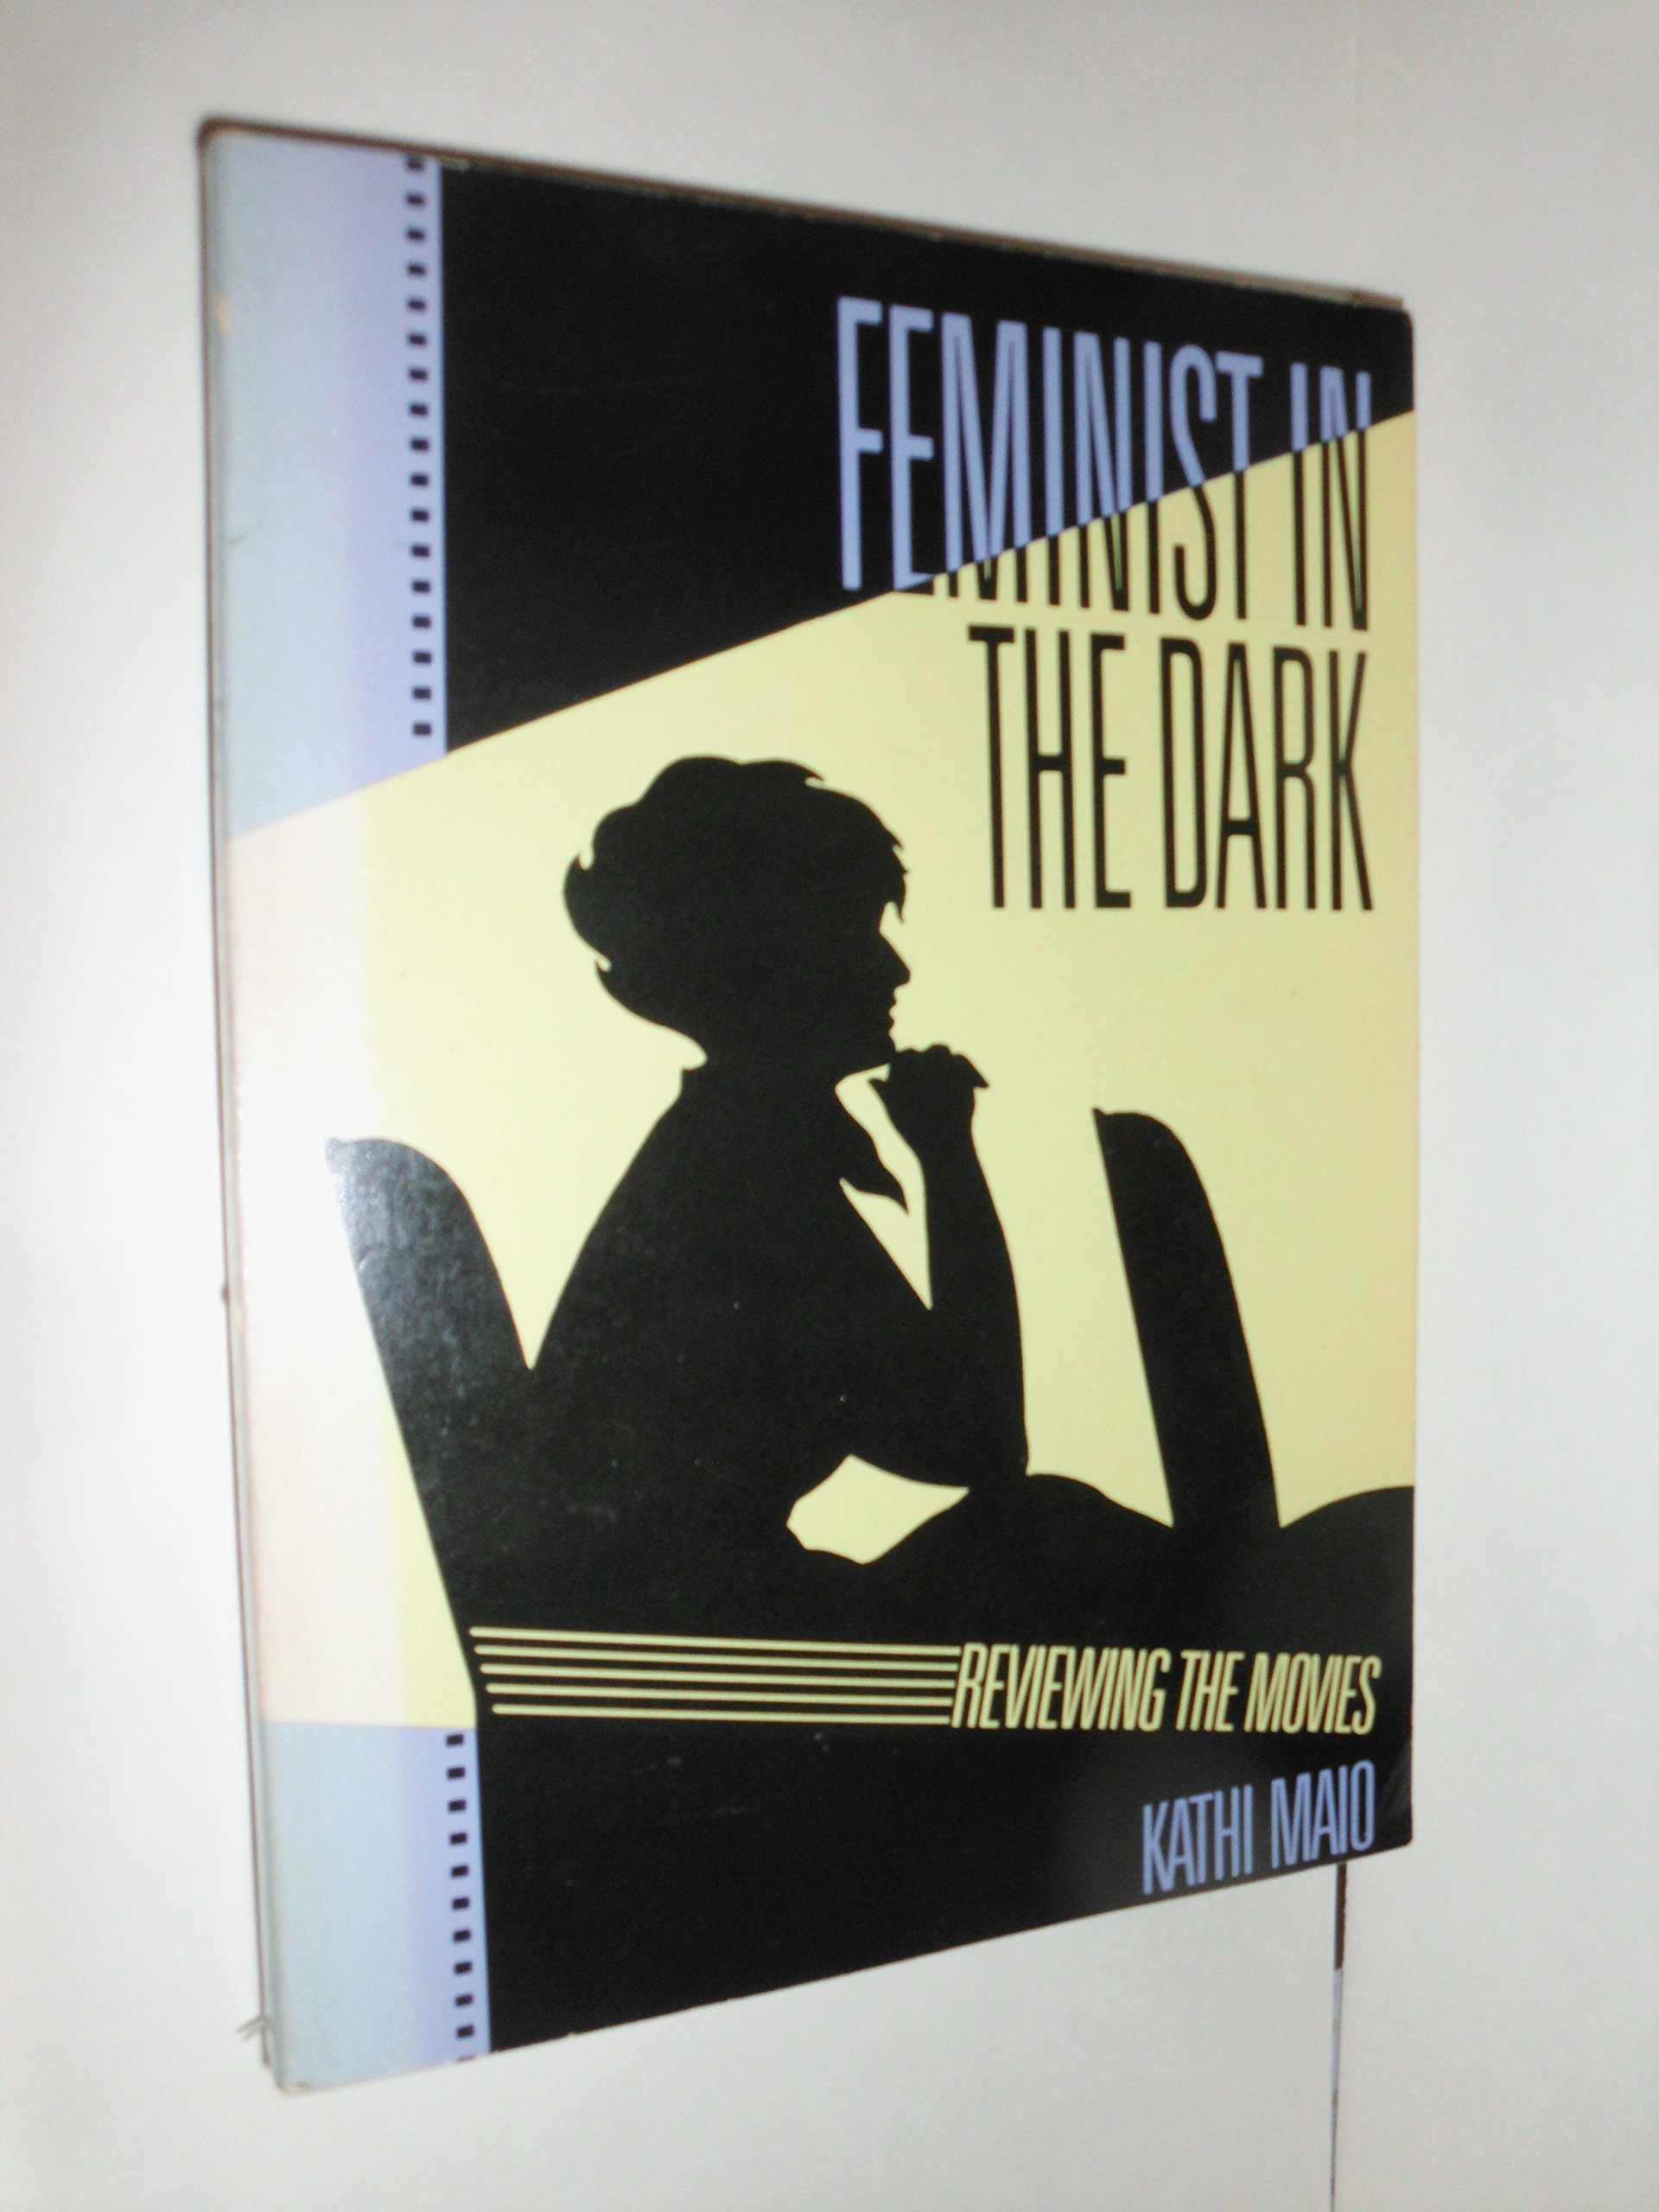 Feminist in the Dark: Reviewing the Movies by Kathi Maio